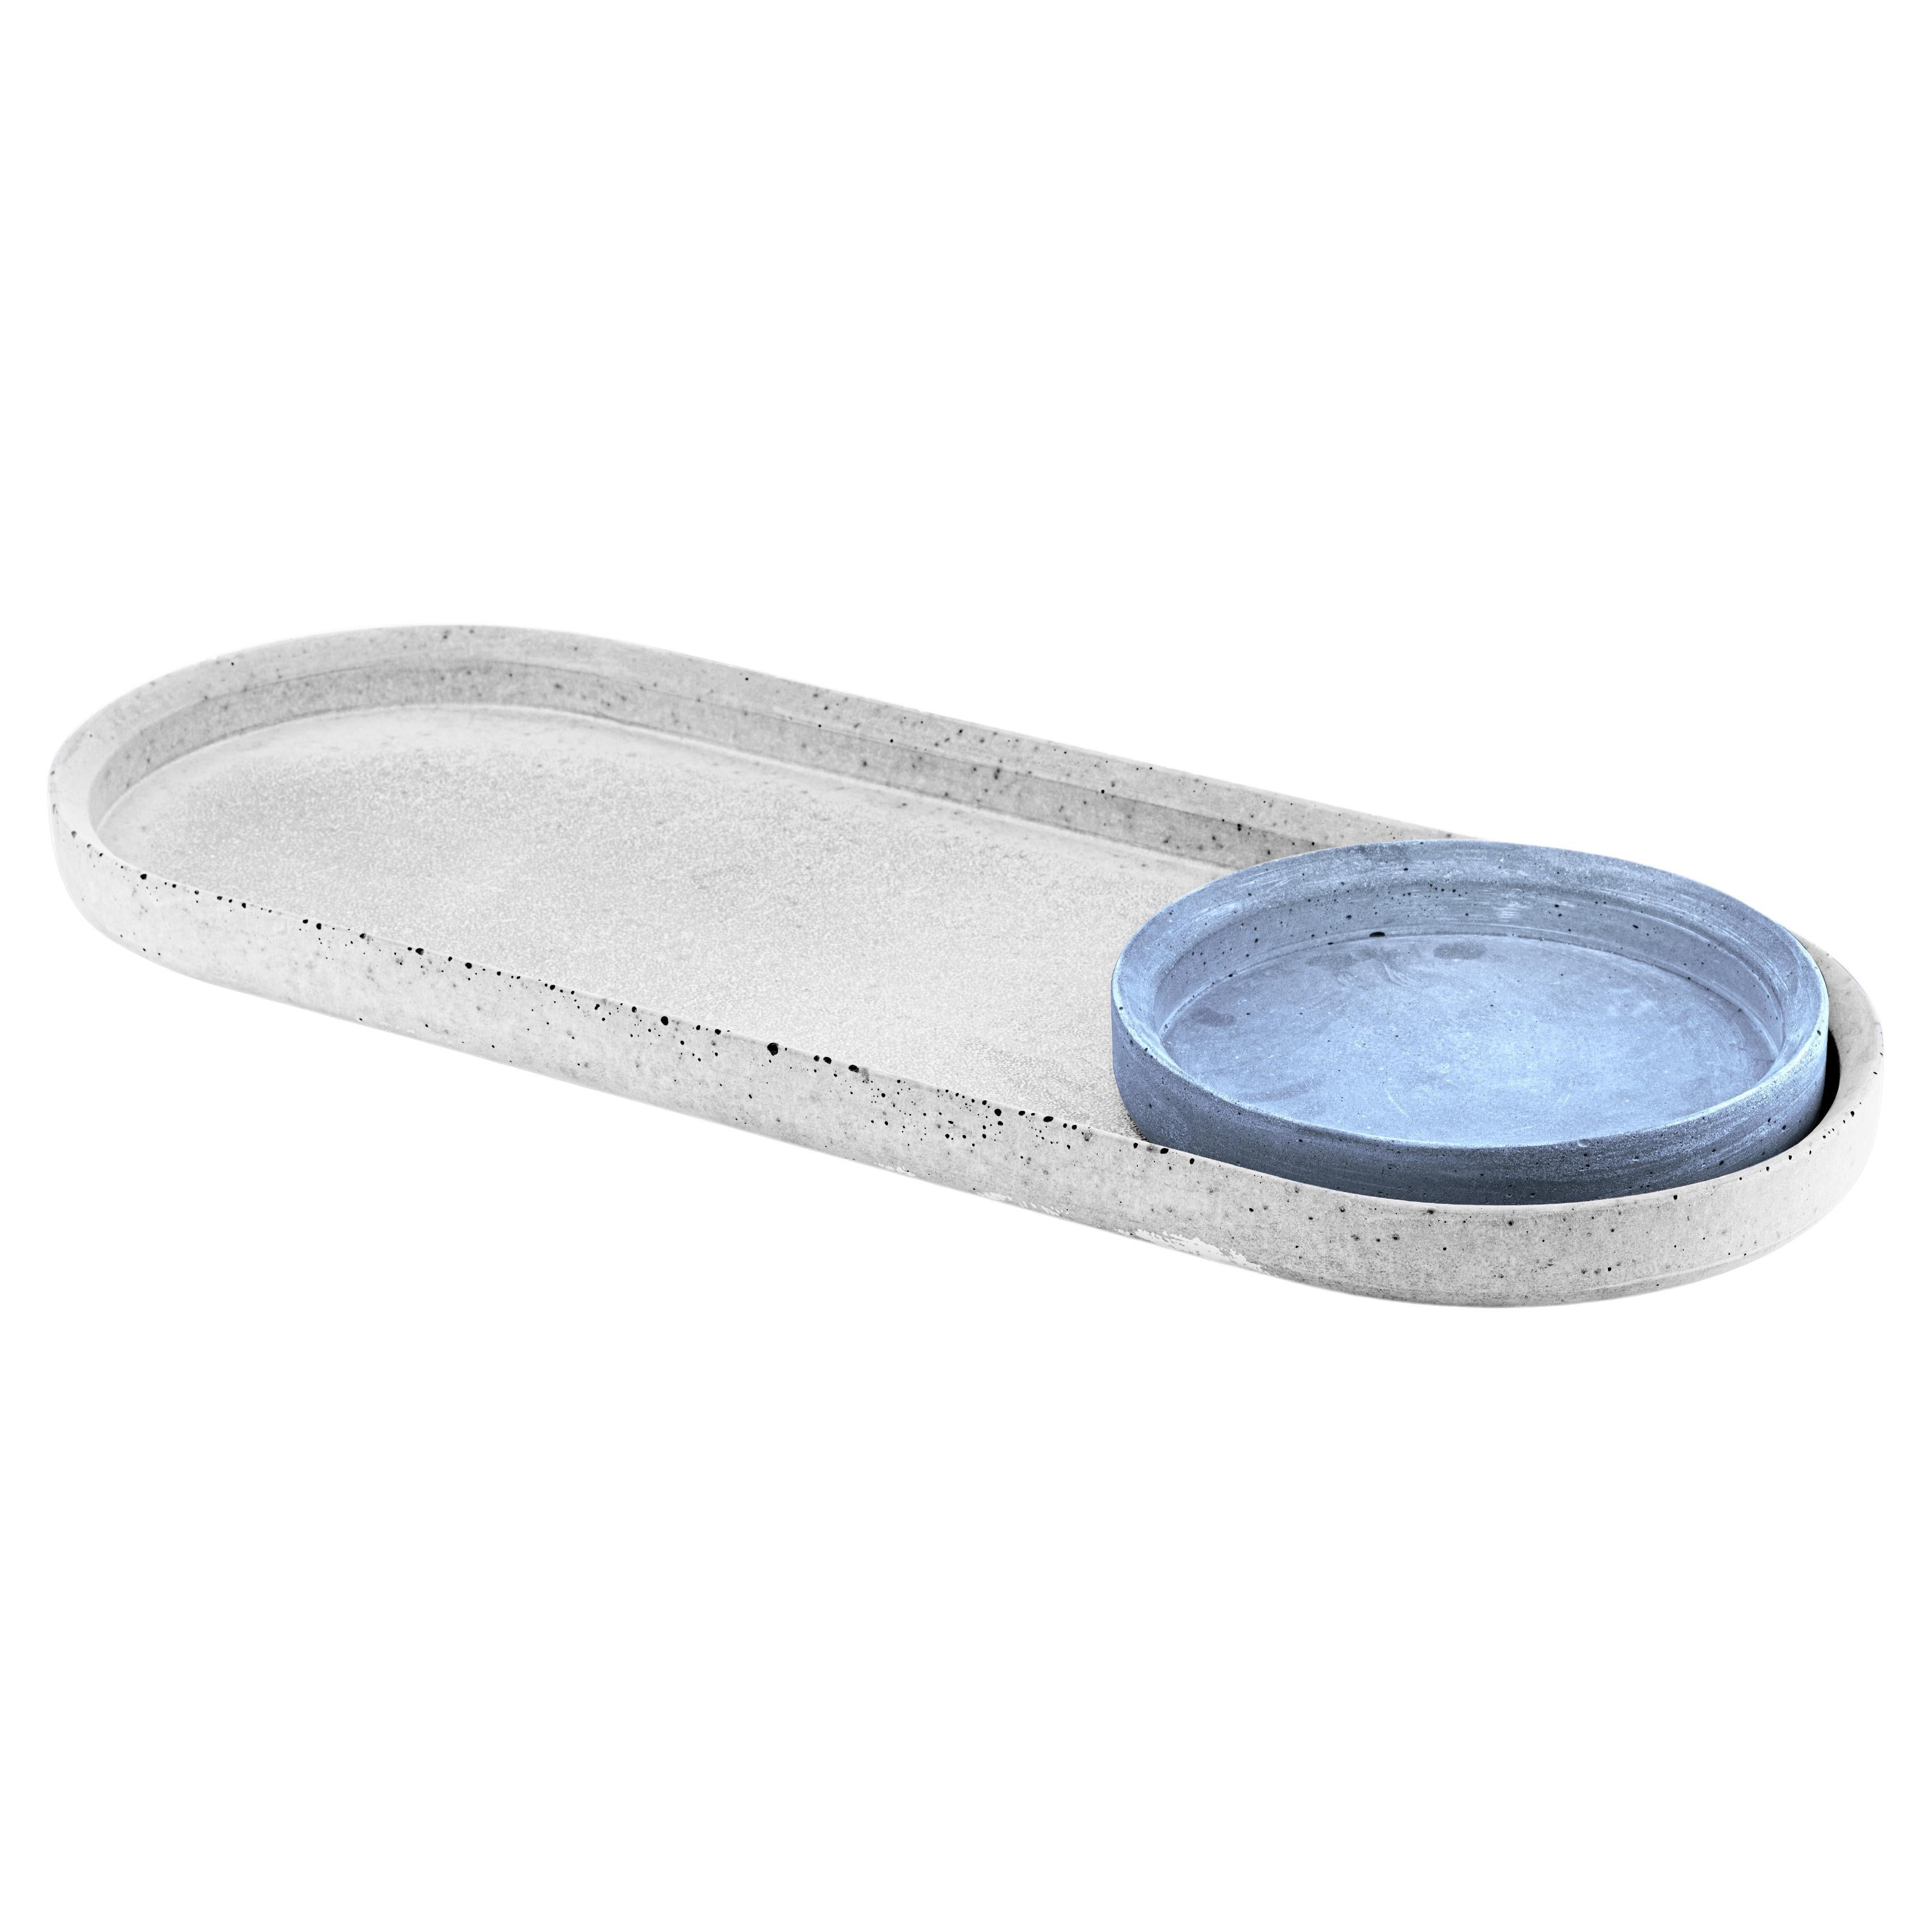 Renzo Set Concrete Tray Made In Italy White&Light Blue Cement Christmas Edition For Sale